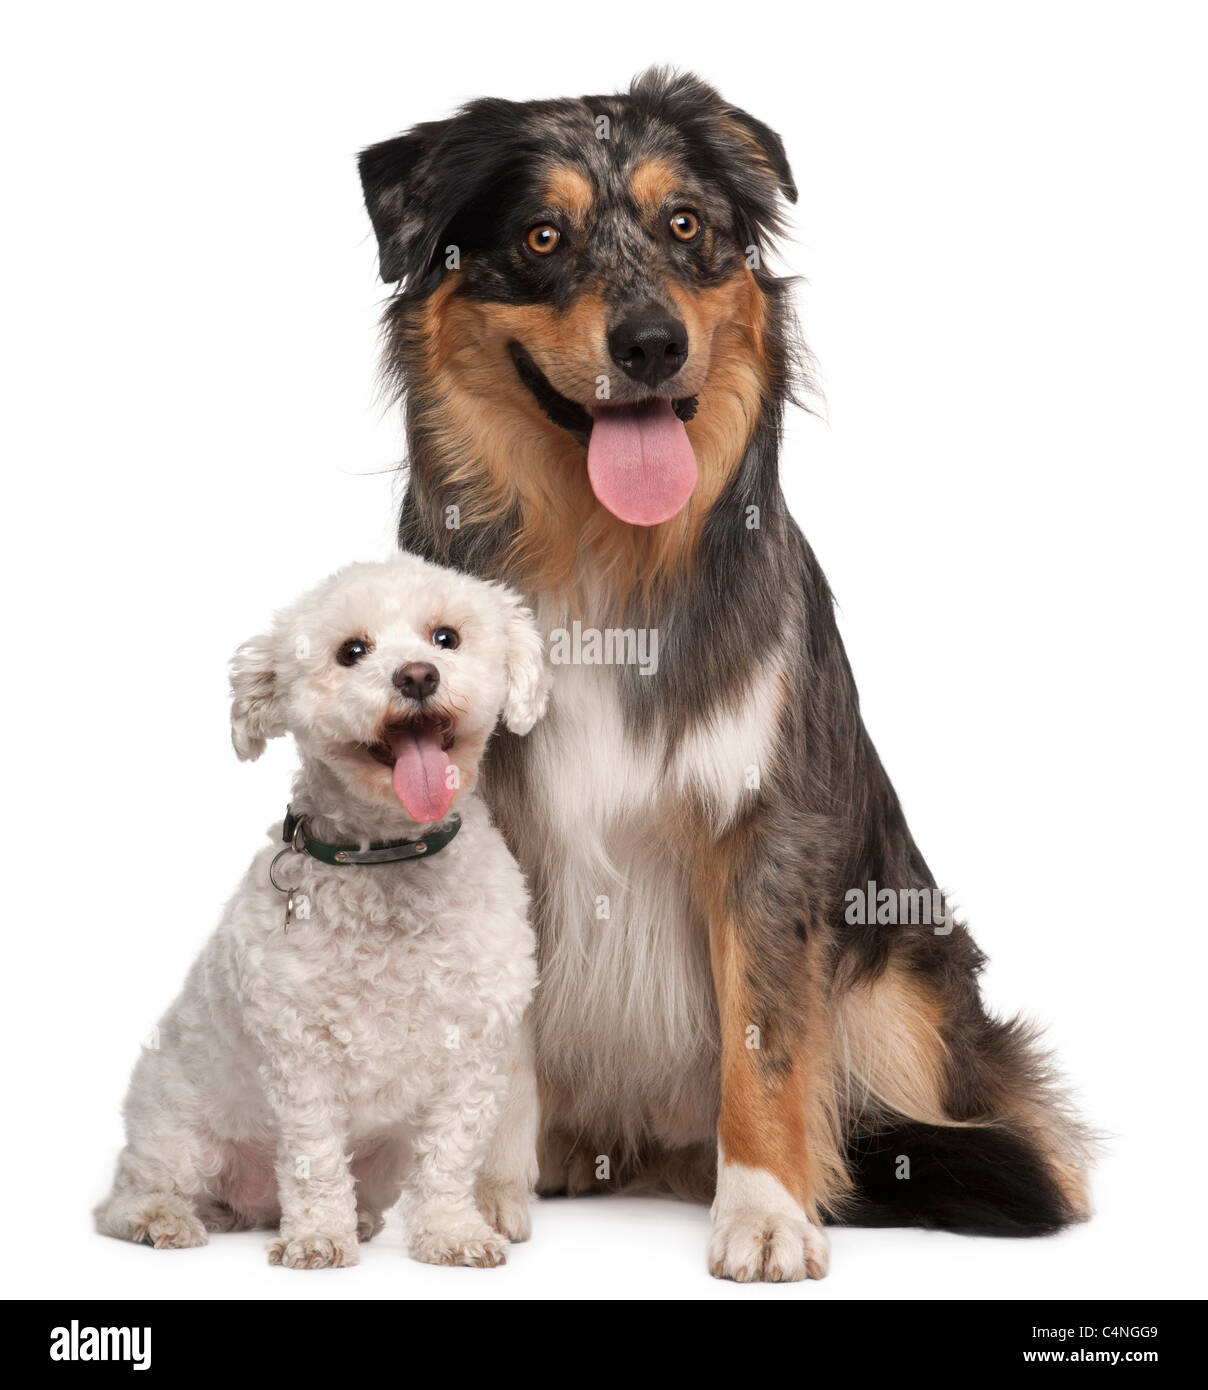 Australian Shepherd dog, 17 months old, and Bichon Fris, 8 years old, sitting in front of white background Stock Photo